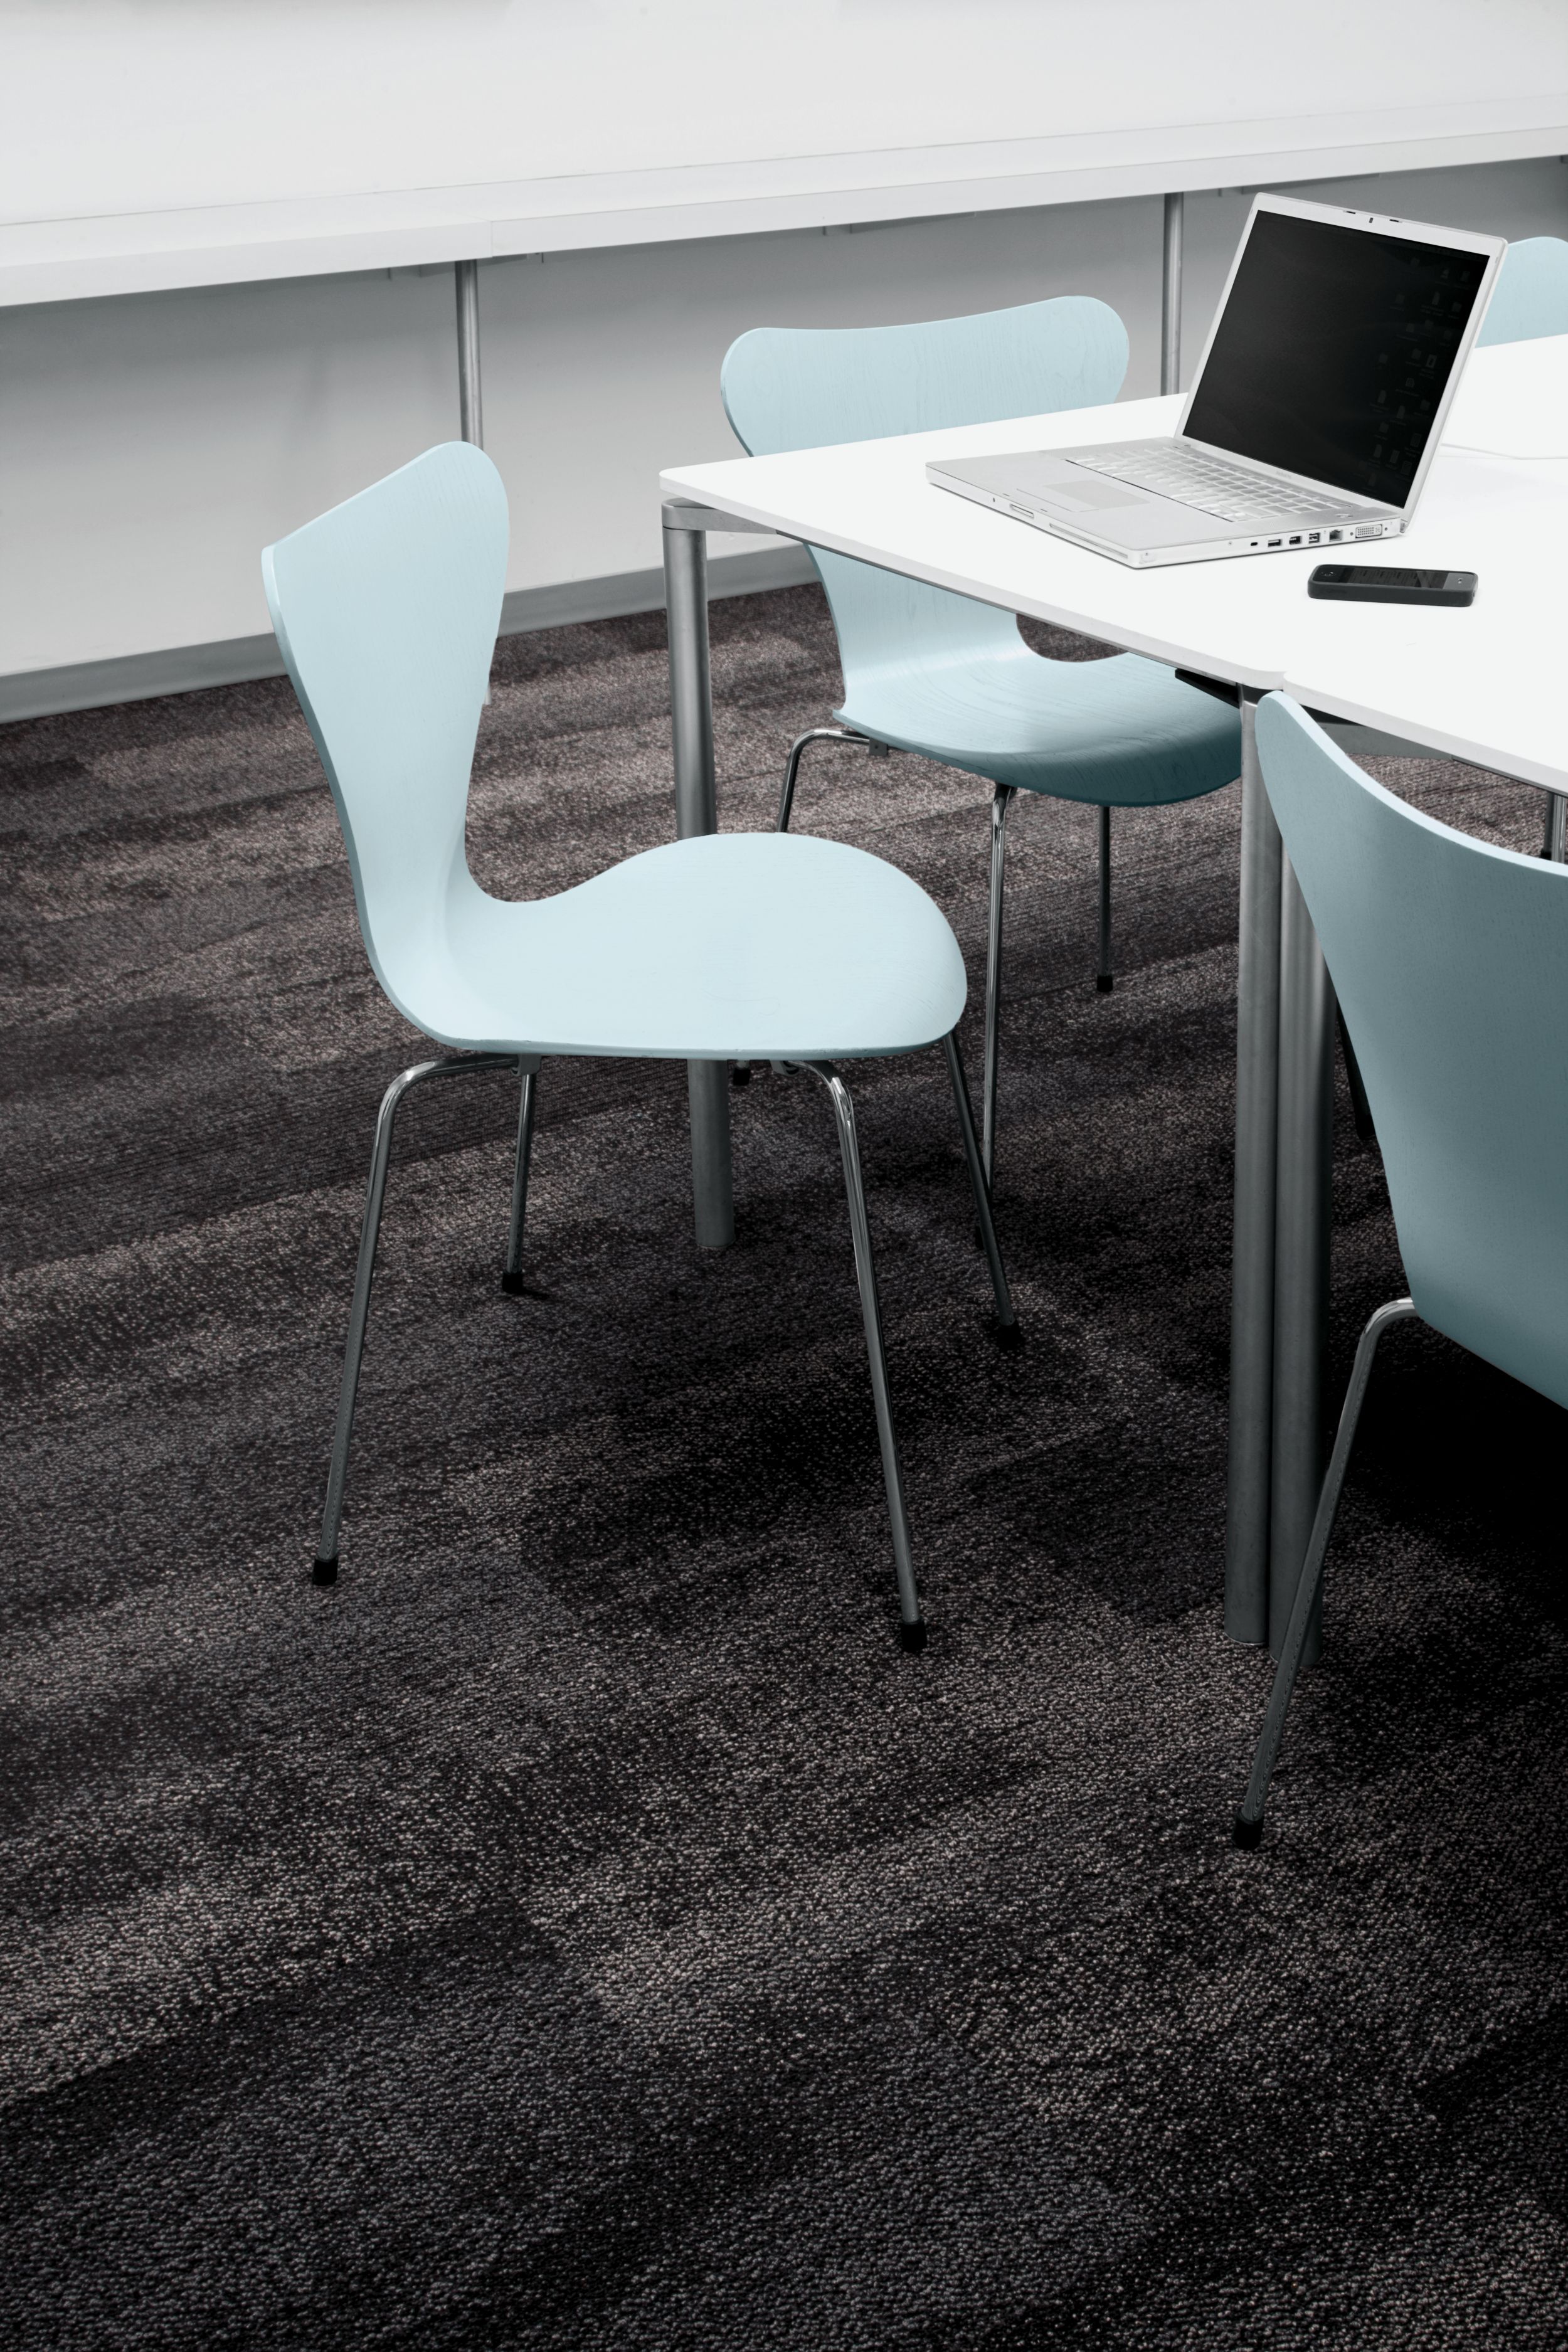 Interface Neighborhood Smooth plank carpet tile in meeting room or classroom with laptop and light blue chairs image number 5